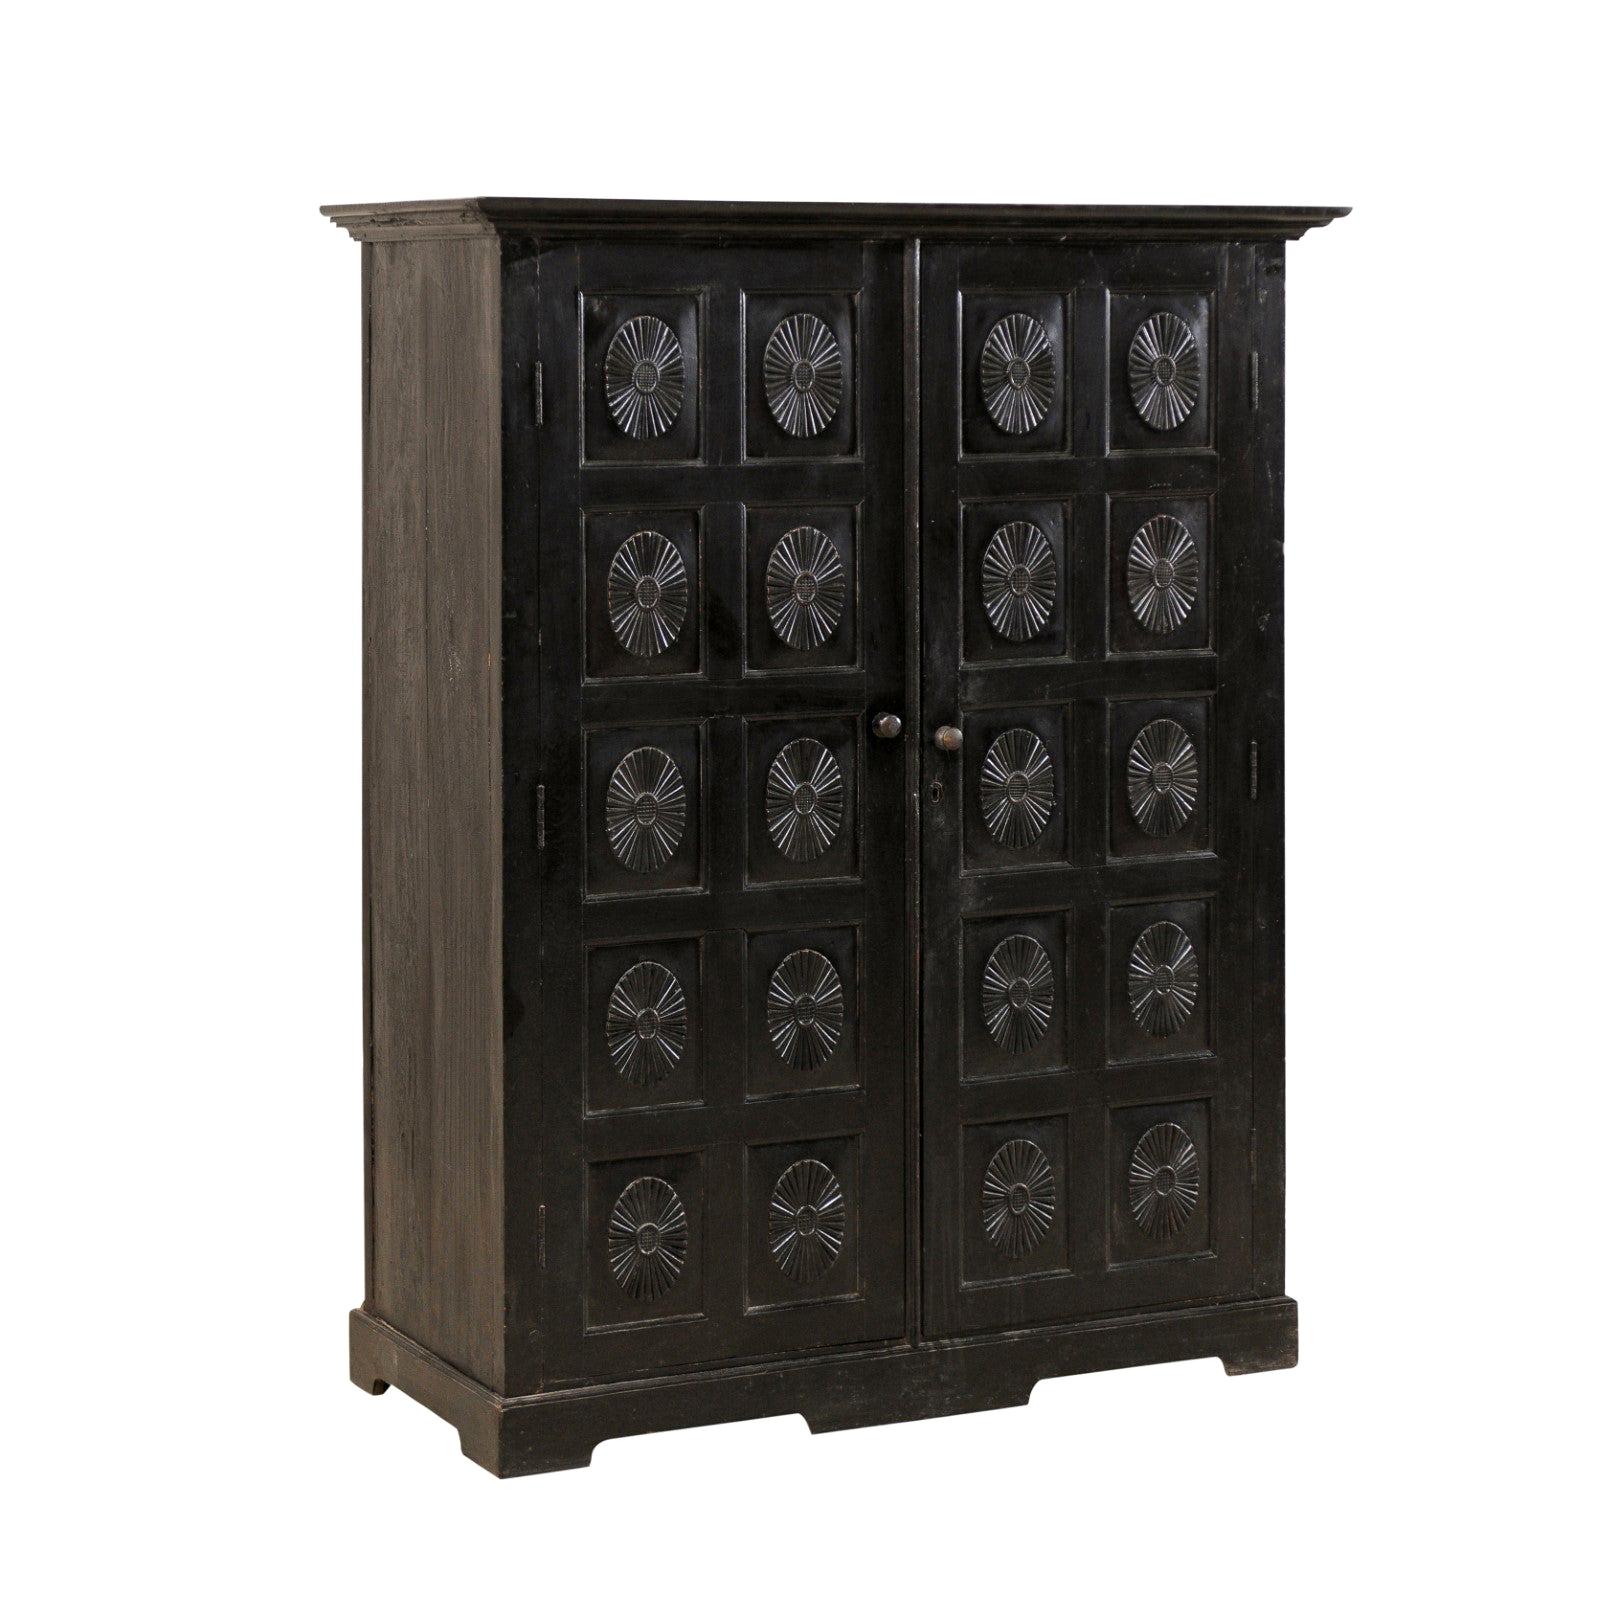 British Colonial Ebonized Wood Cabinet from Mid-20th Century